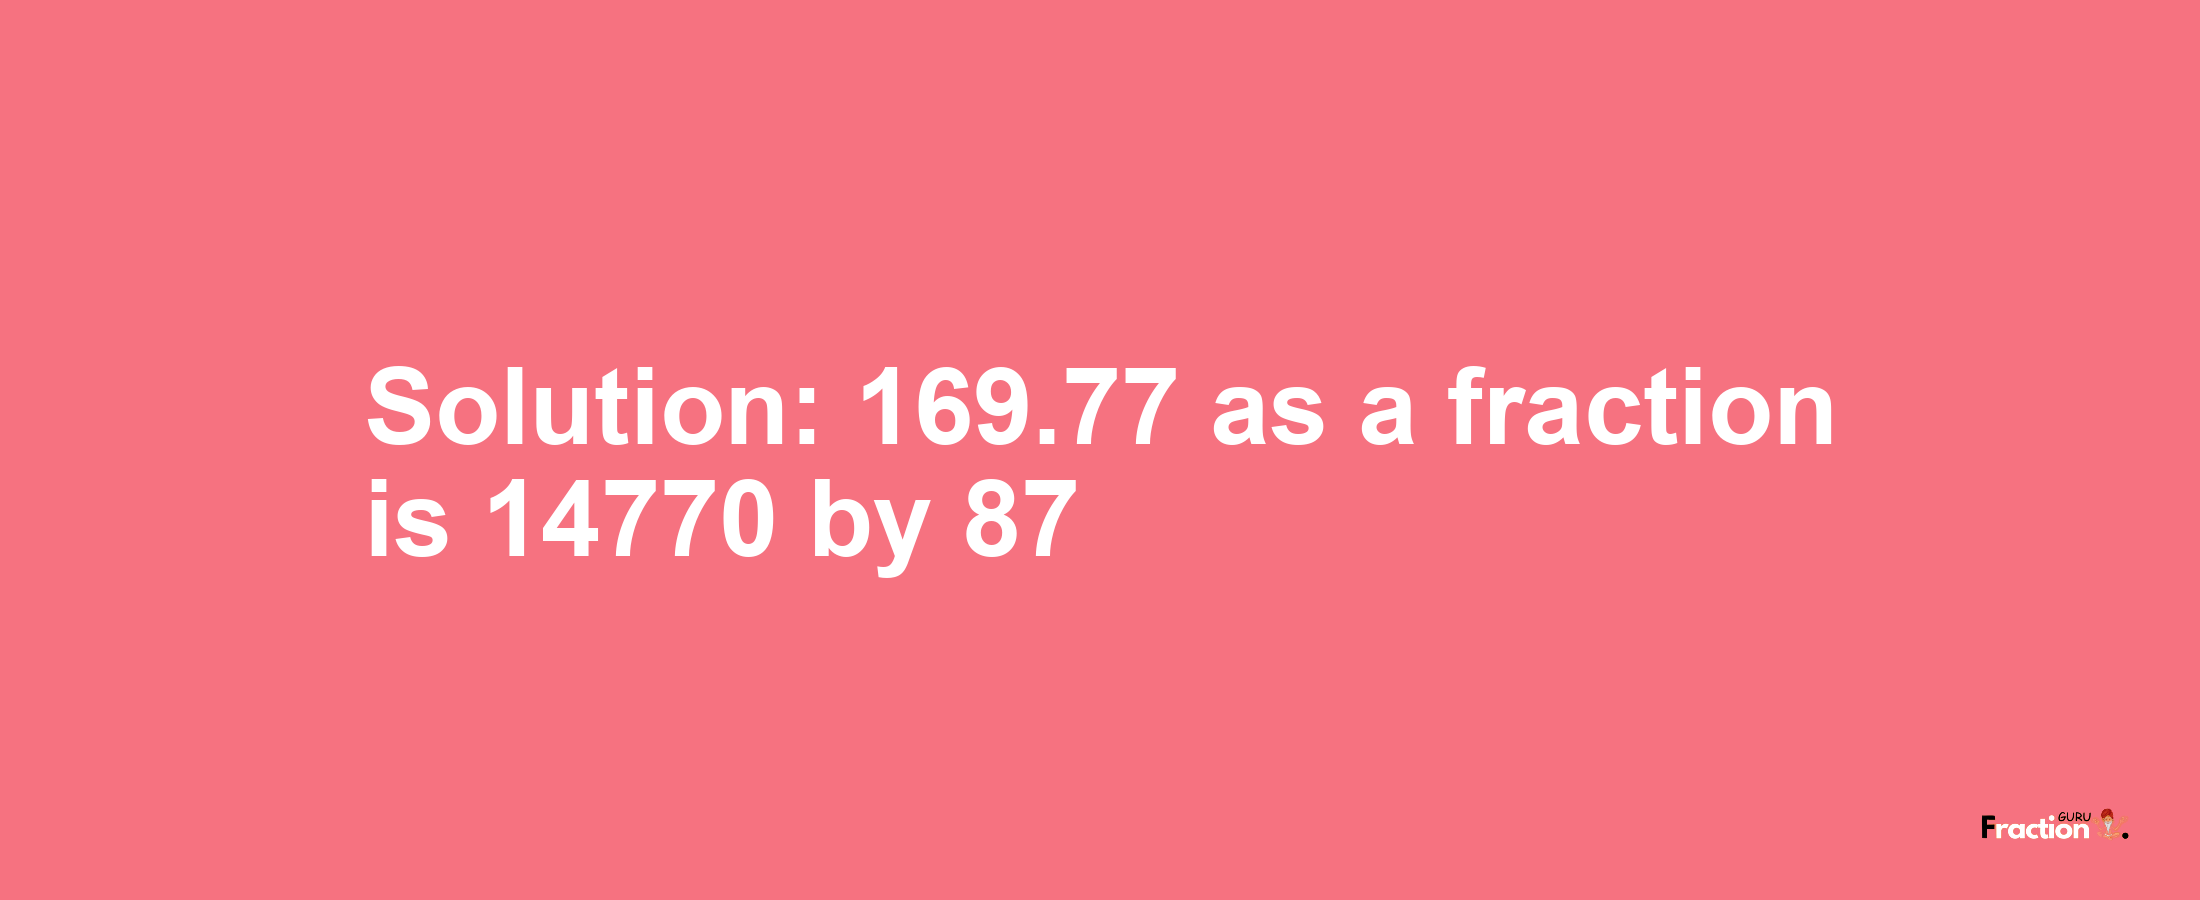 Solution:169.77 as a fraction is 14770/87